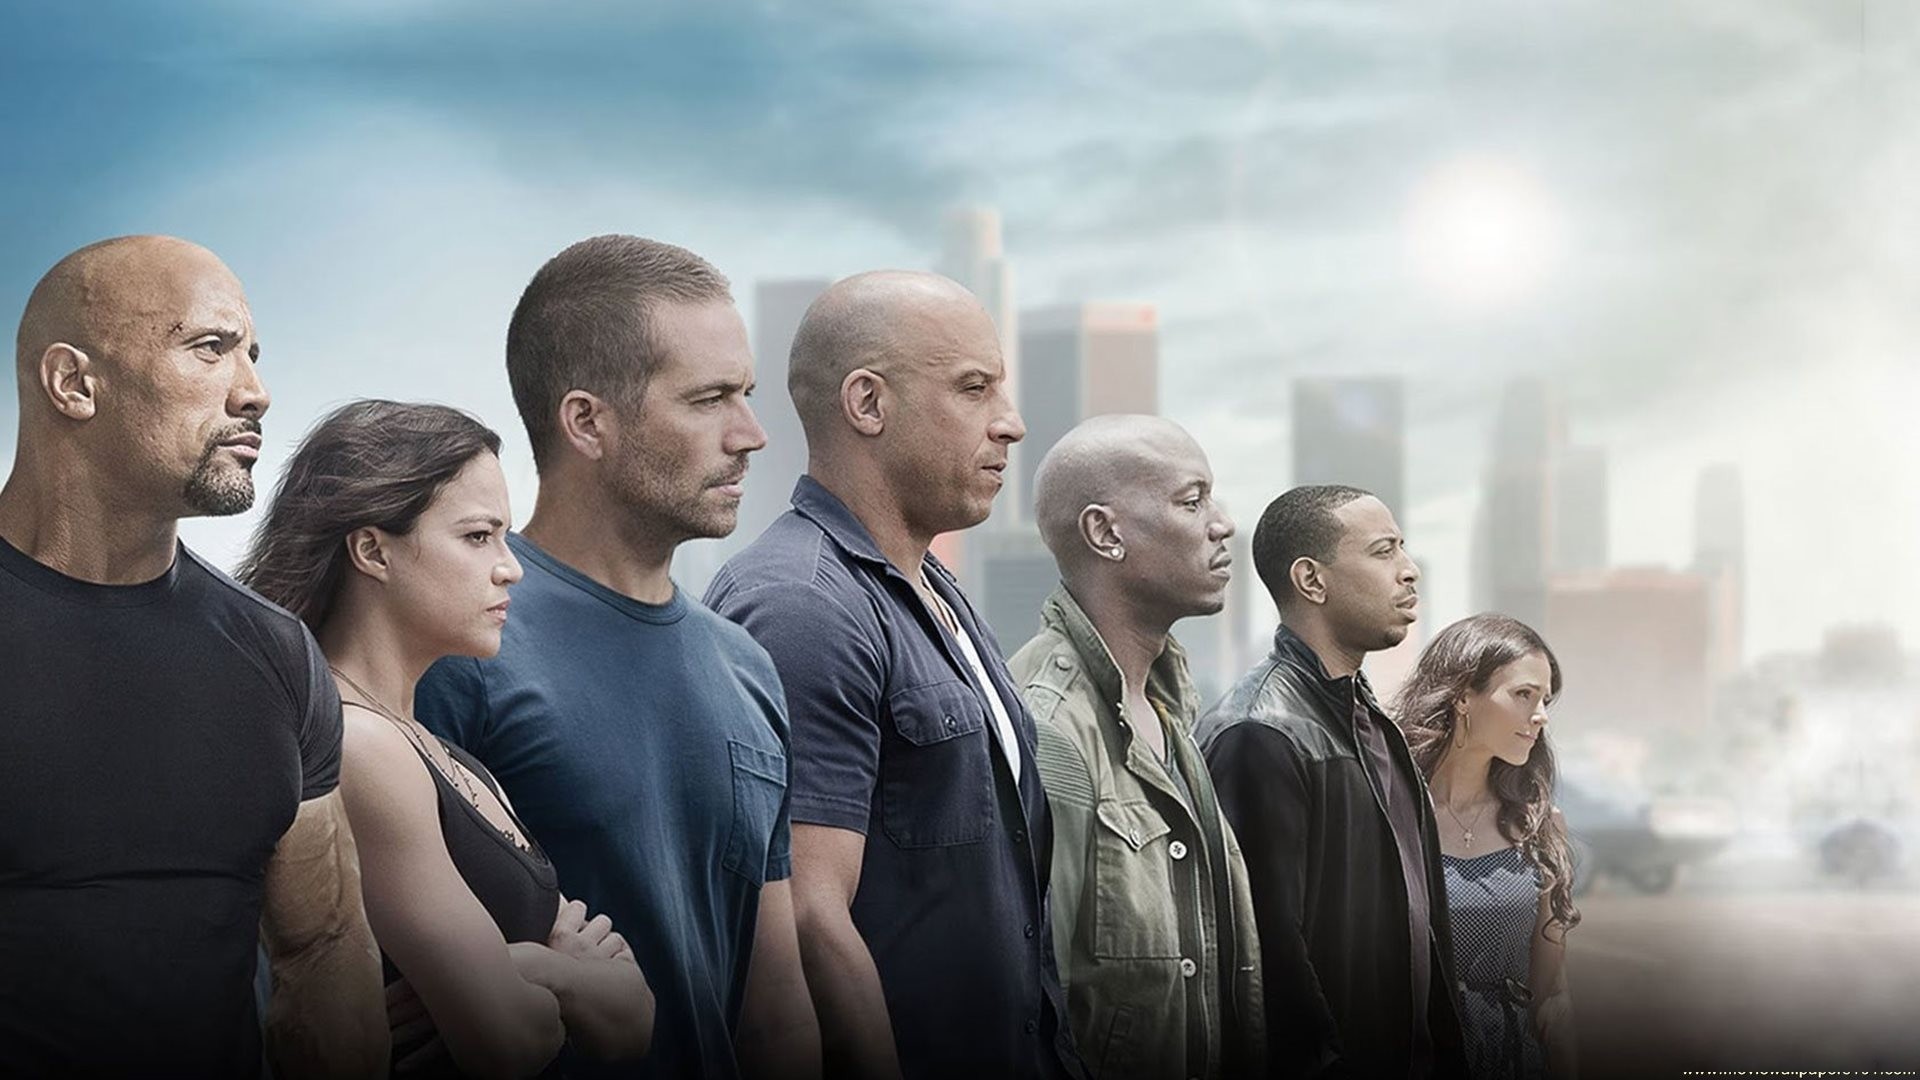 1920x1080 Download Furious 7 2015 Movie Full Cast Poster HD Wallpaper Search 